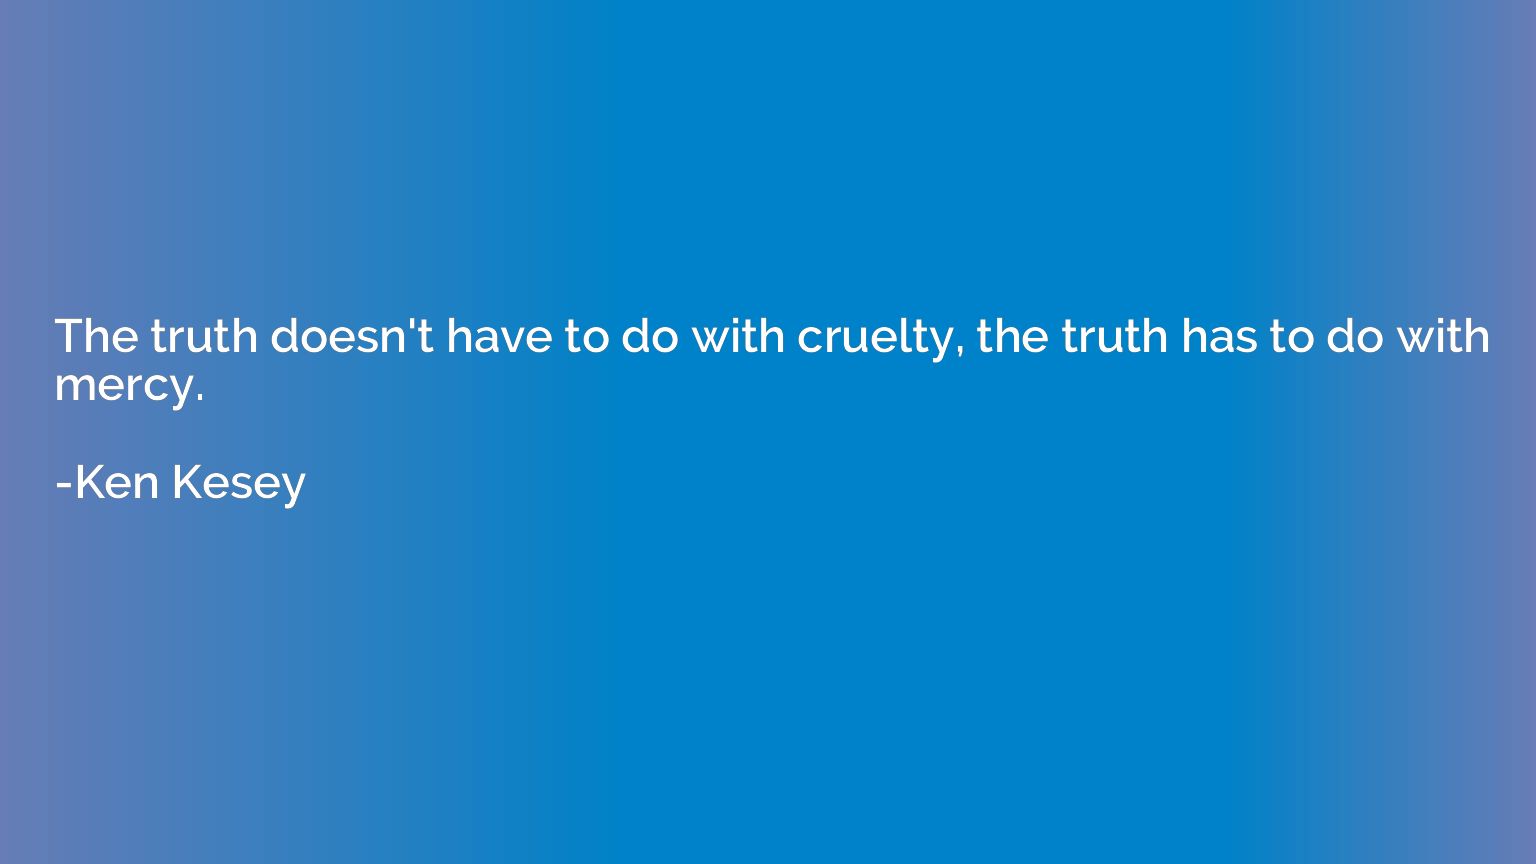 The truth doesn't have to do with cruelty, the truth has to 